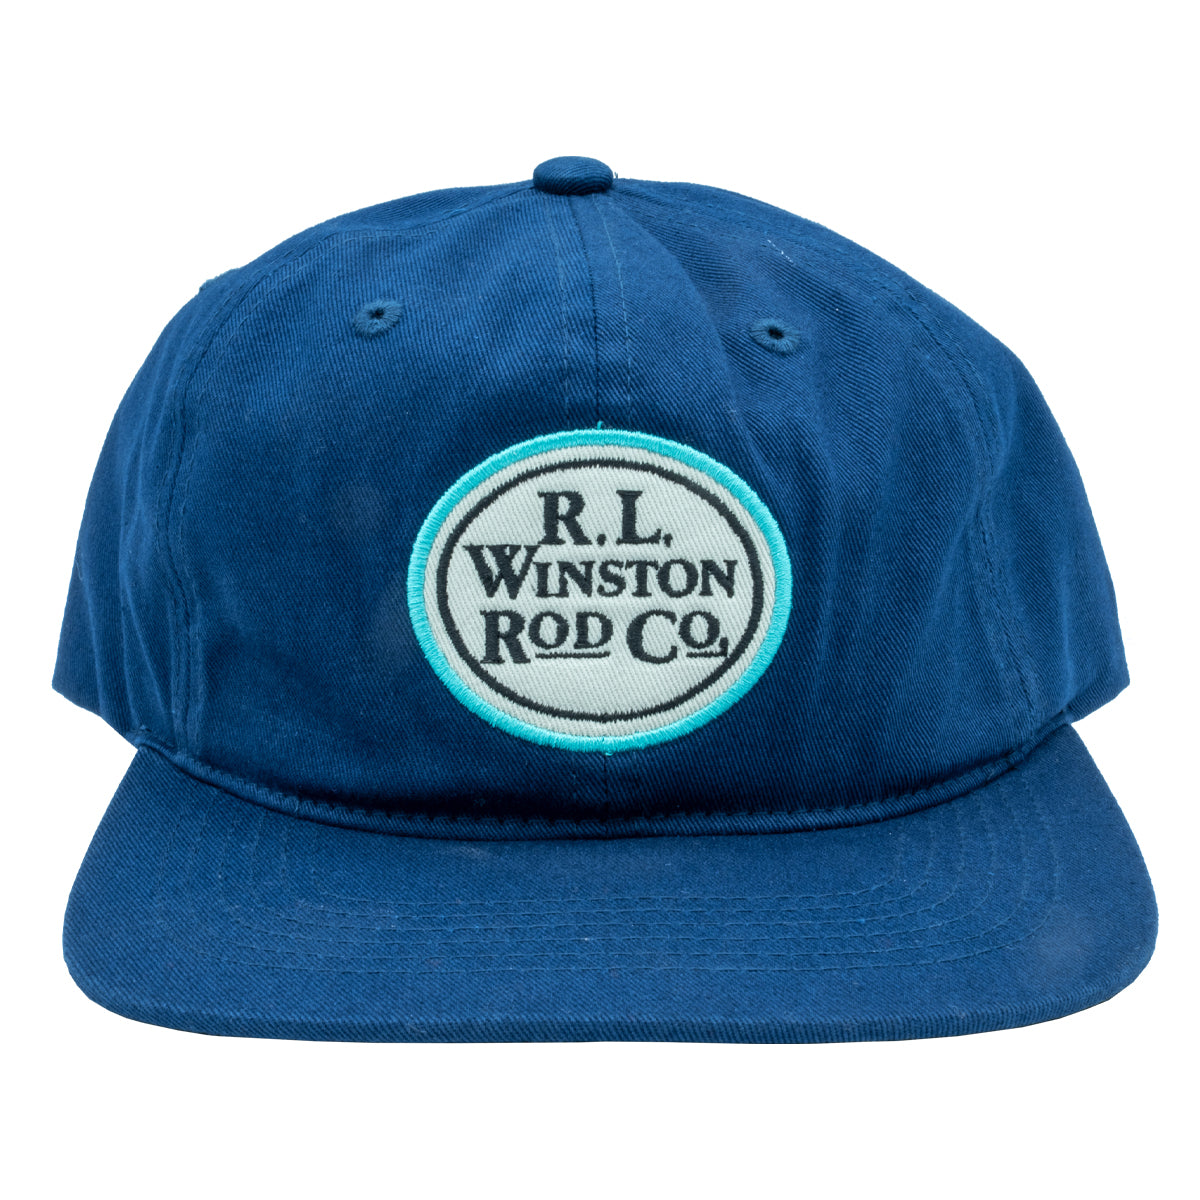 R.L. Winston Tailwater Hat Navy – Madison River Fishing Company